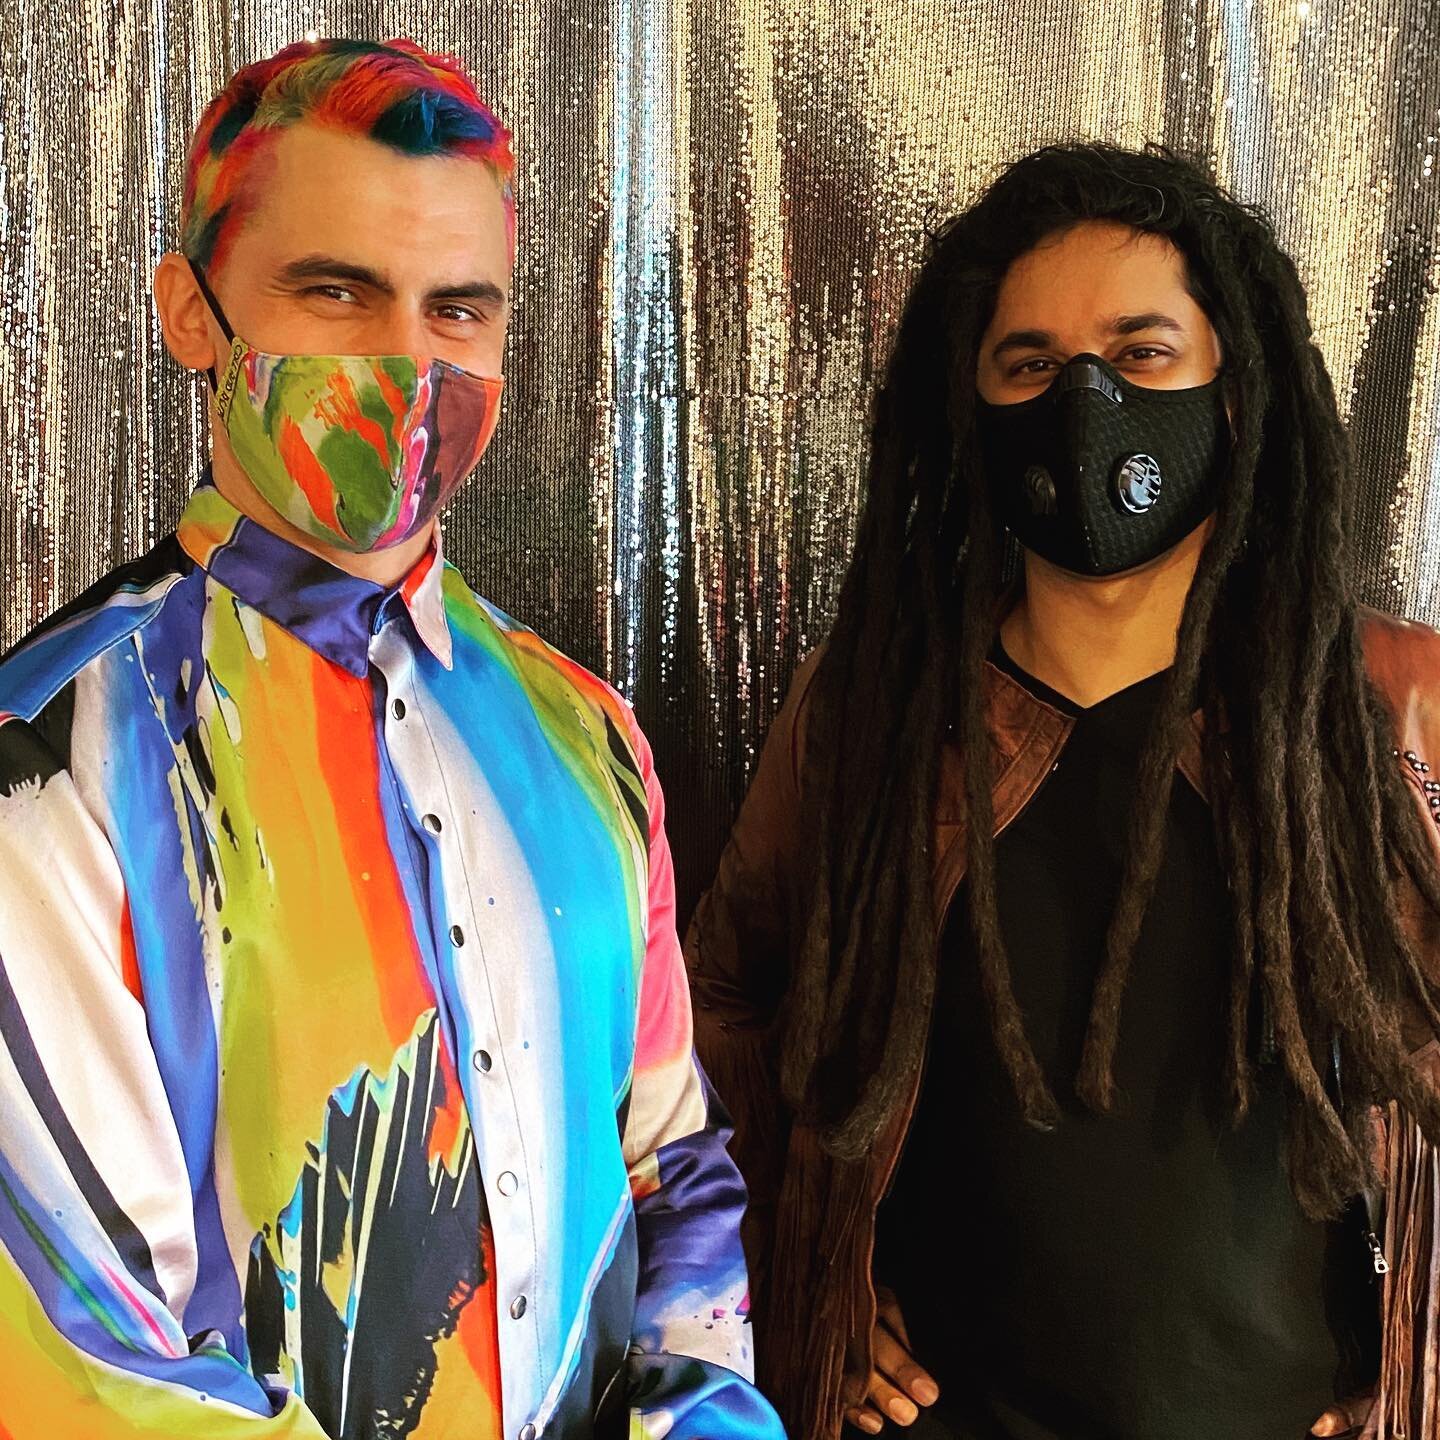 🎨This man is fearless! One of my favorite visual artists in the world 🌎 today @callenschaub sporting his 🔥 fashion line in collab with @callandresponseclothing 
.
.
.
.
.
.

#paint #artist #torontoartist #torontomusic #cosmiccheetah #colourful #ca